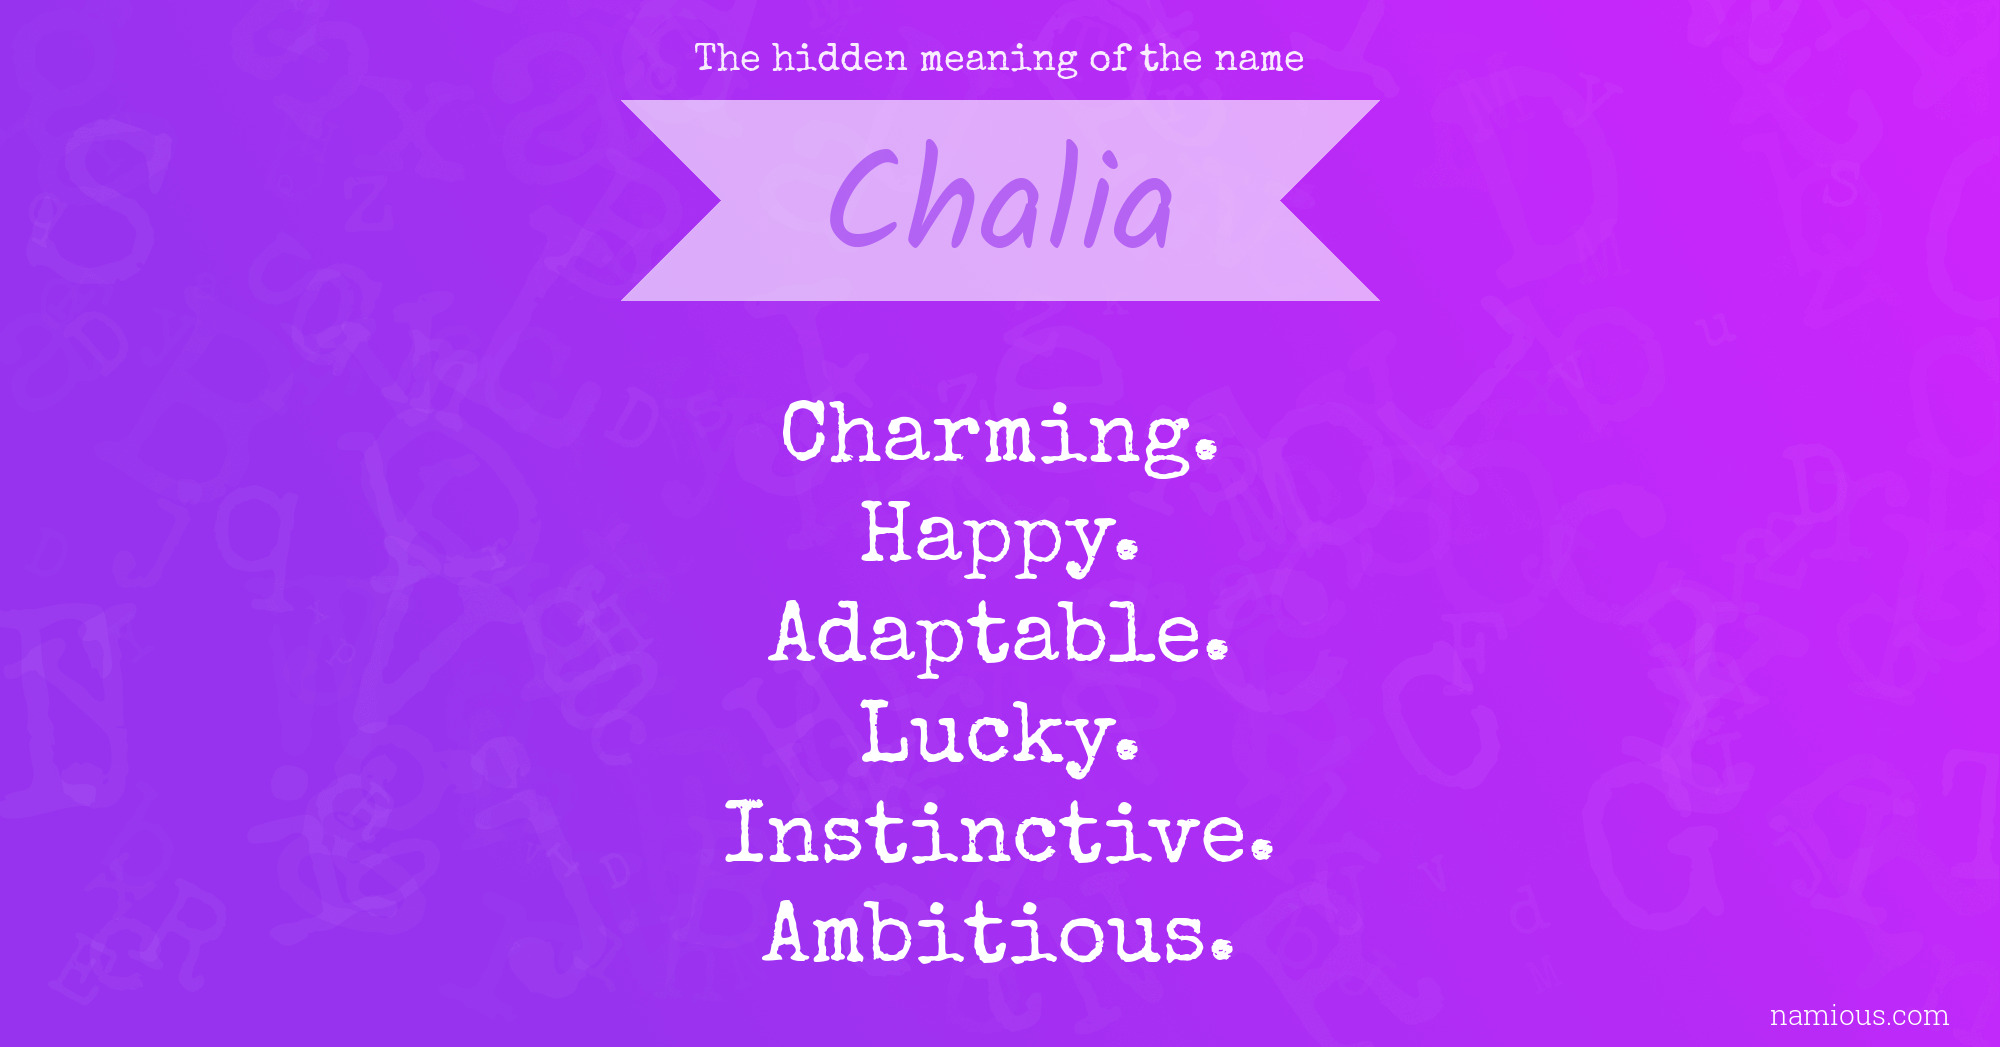 The hidden meaning of the name Chalia